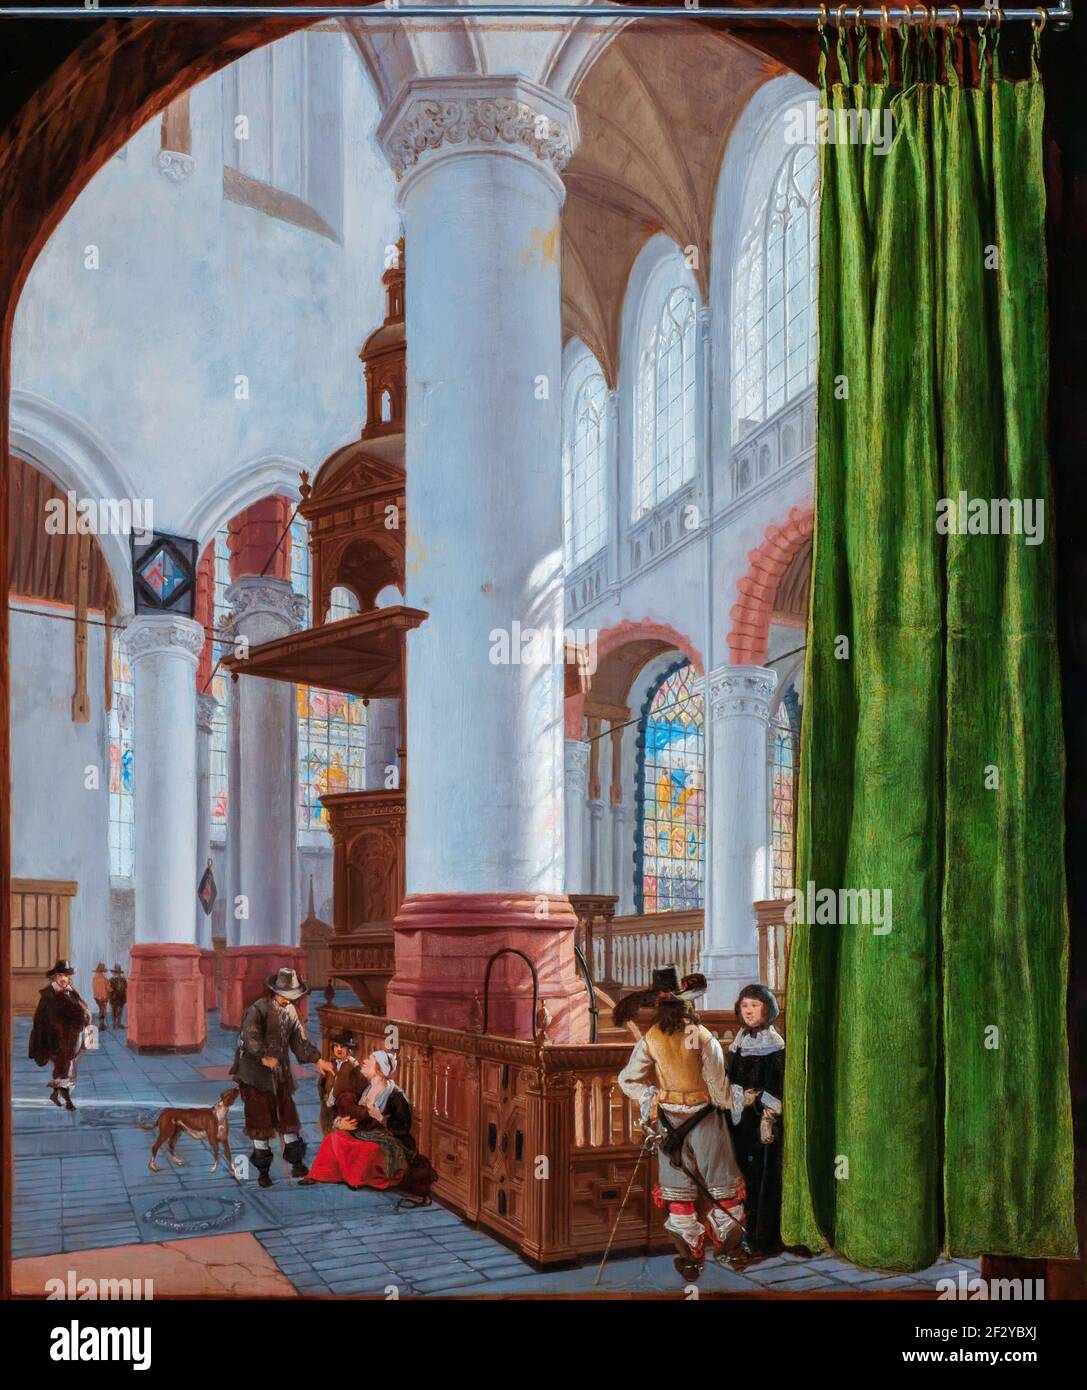 Interior of the Oude Kerk in Delft. Church interior with various figures, on the right a soldier is talking to a woman. In the center the pulpit behin Stock Photo